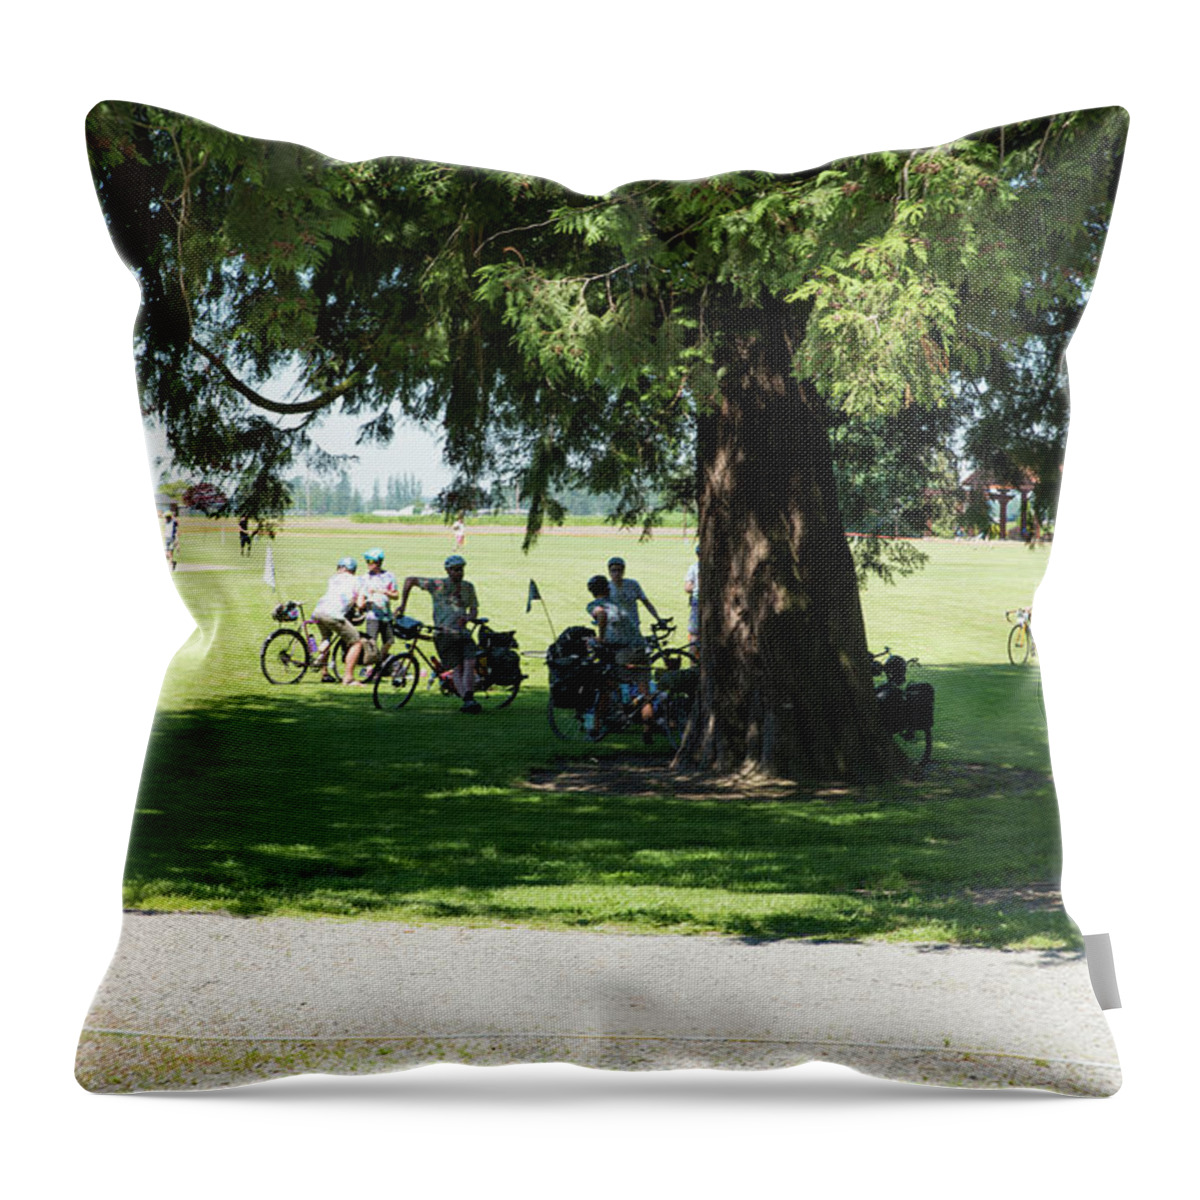 Cyclists Throw Pillow featuring the photograph After the Bike Leg by Tom Cochran